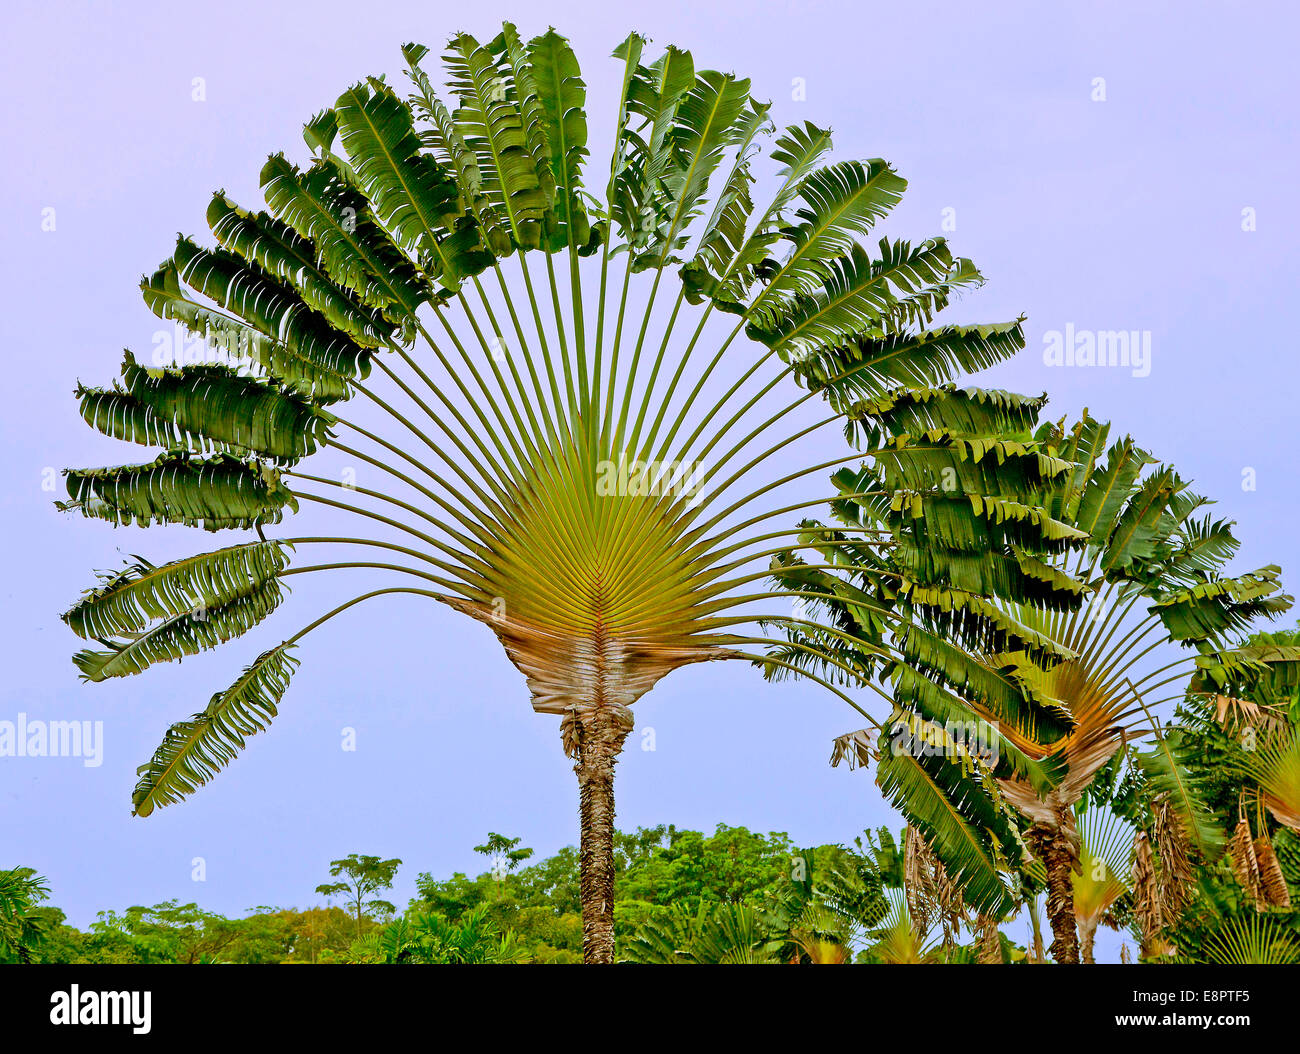 Fan Leaf Tree High Resolution Stock Photography and Images - Alamy